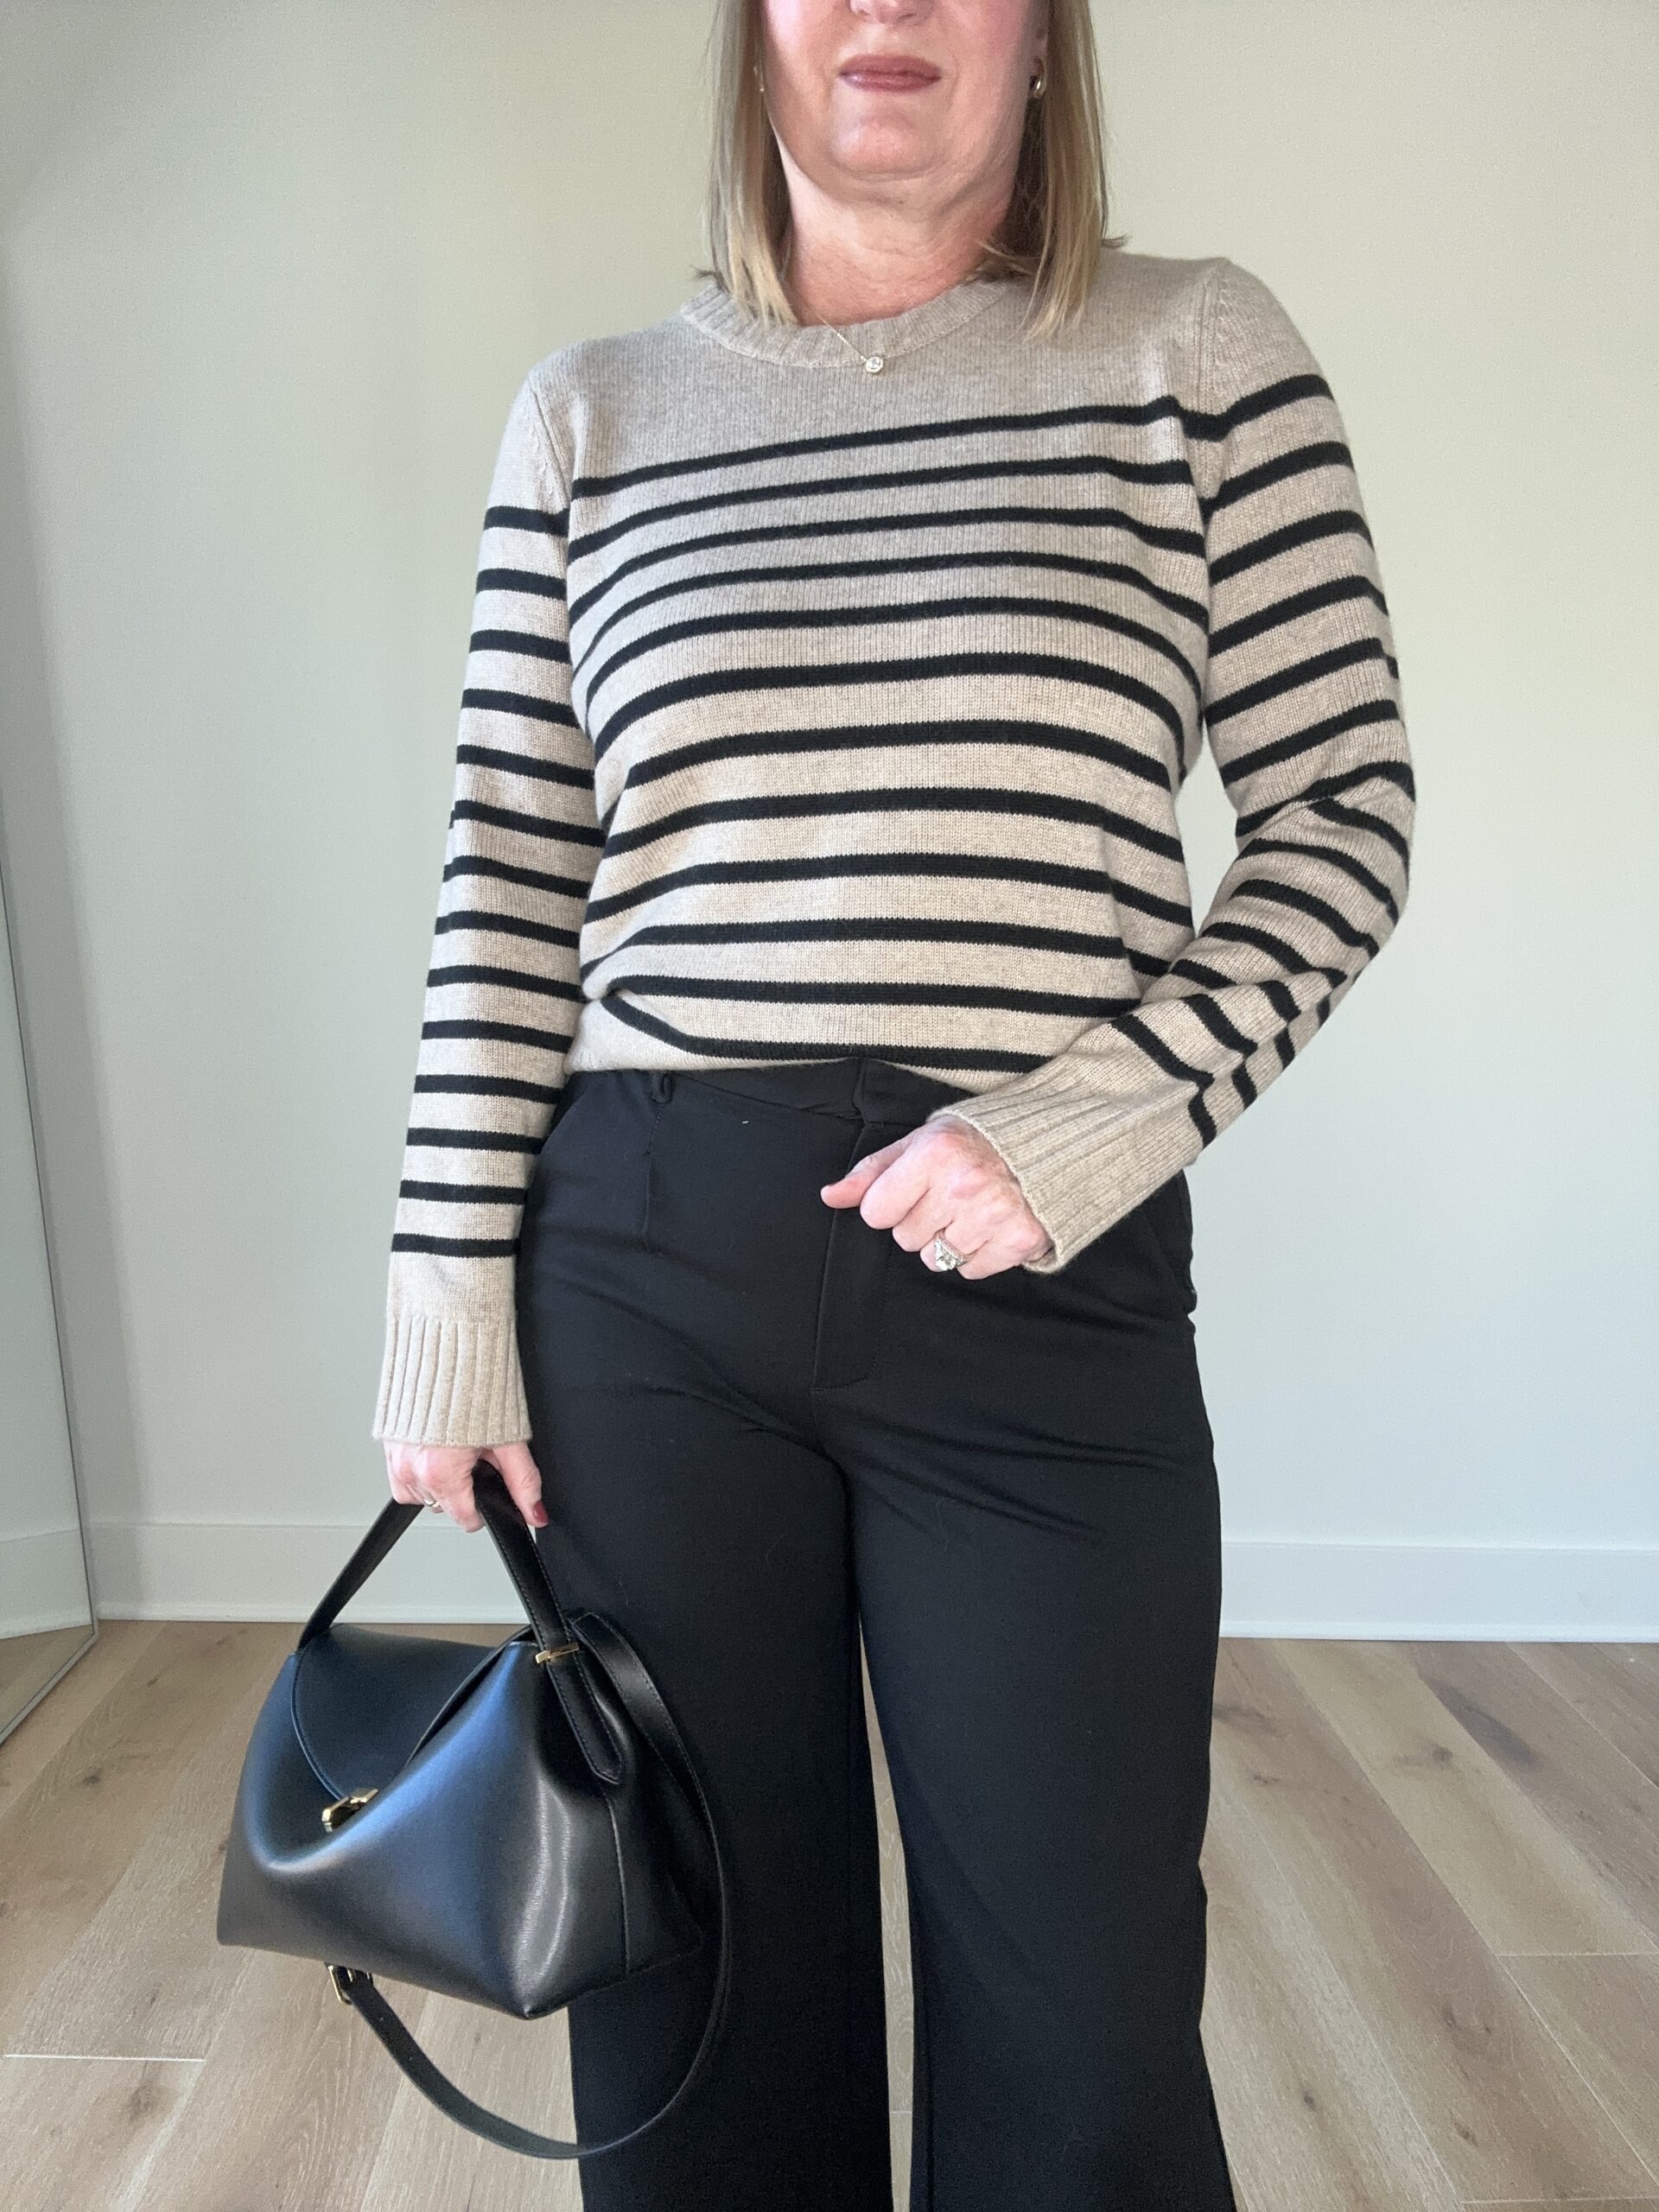 How To Style Sweaters In Your Fall And Winter Outfits - Classy Yet